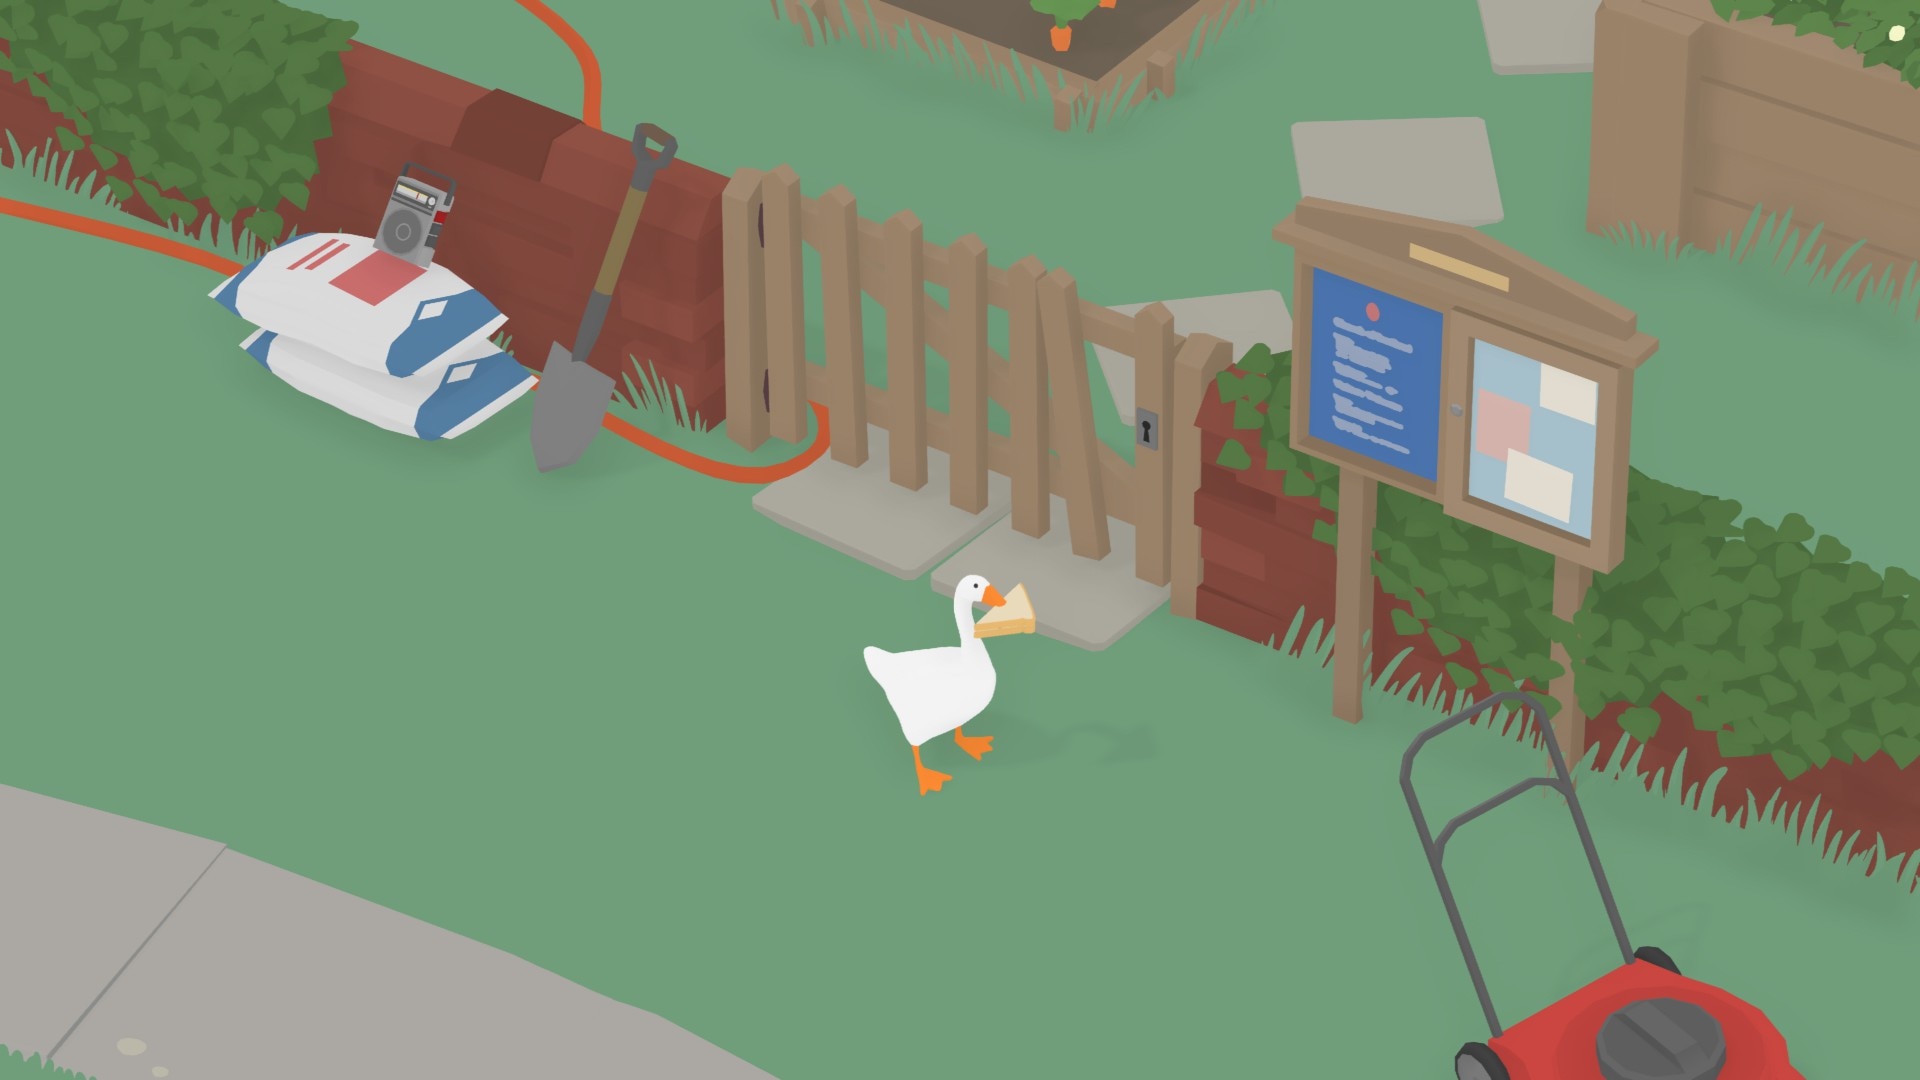 untitled goose game